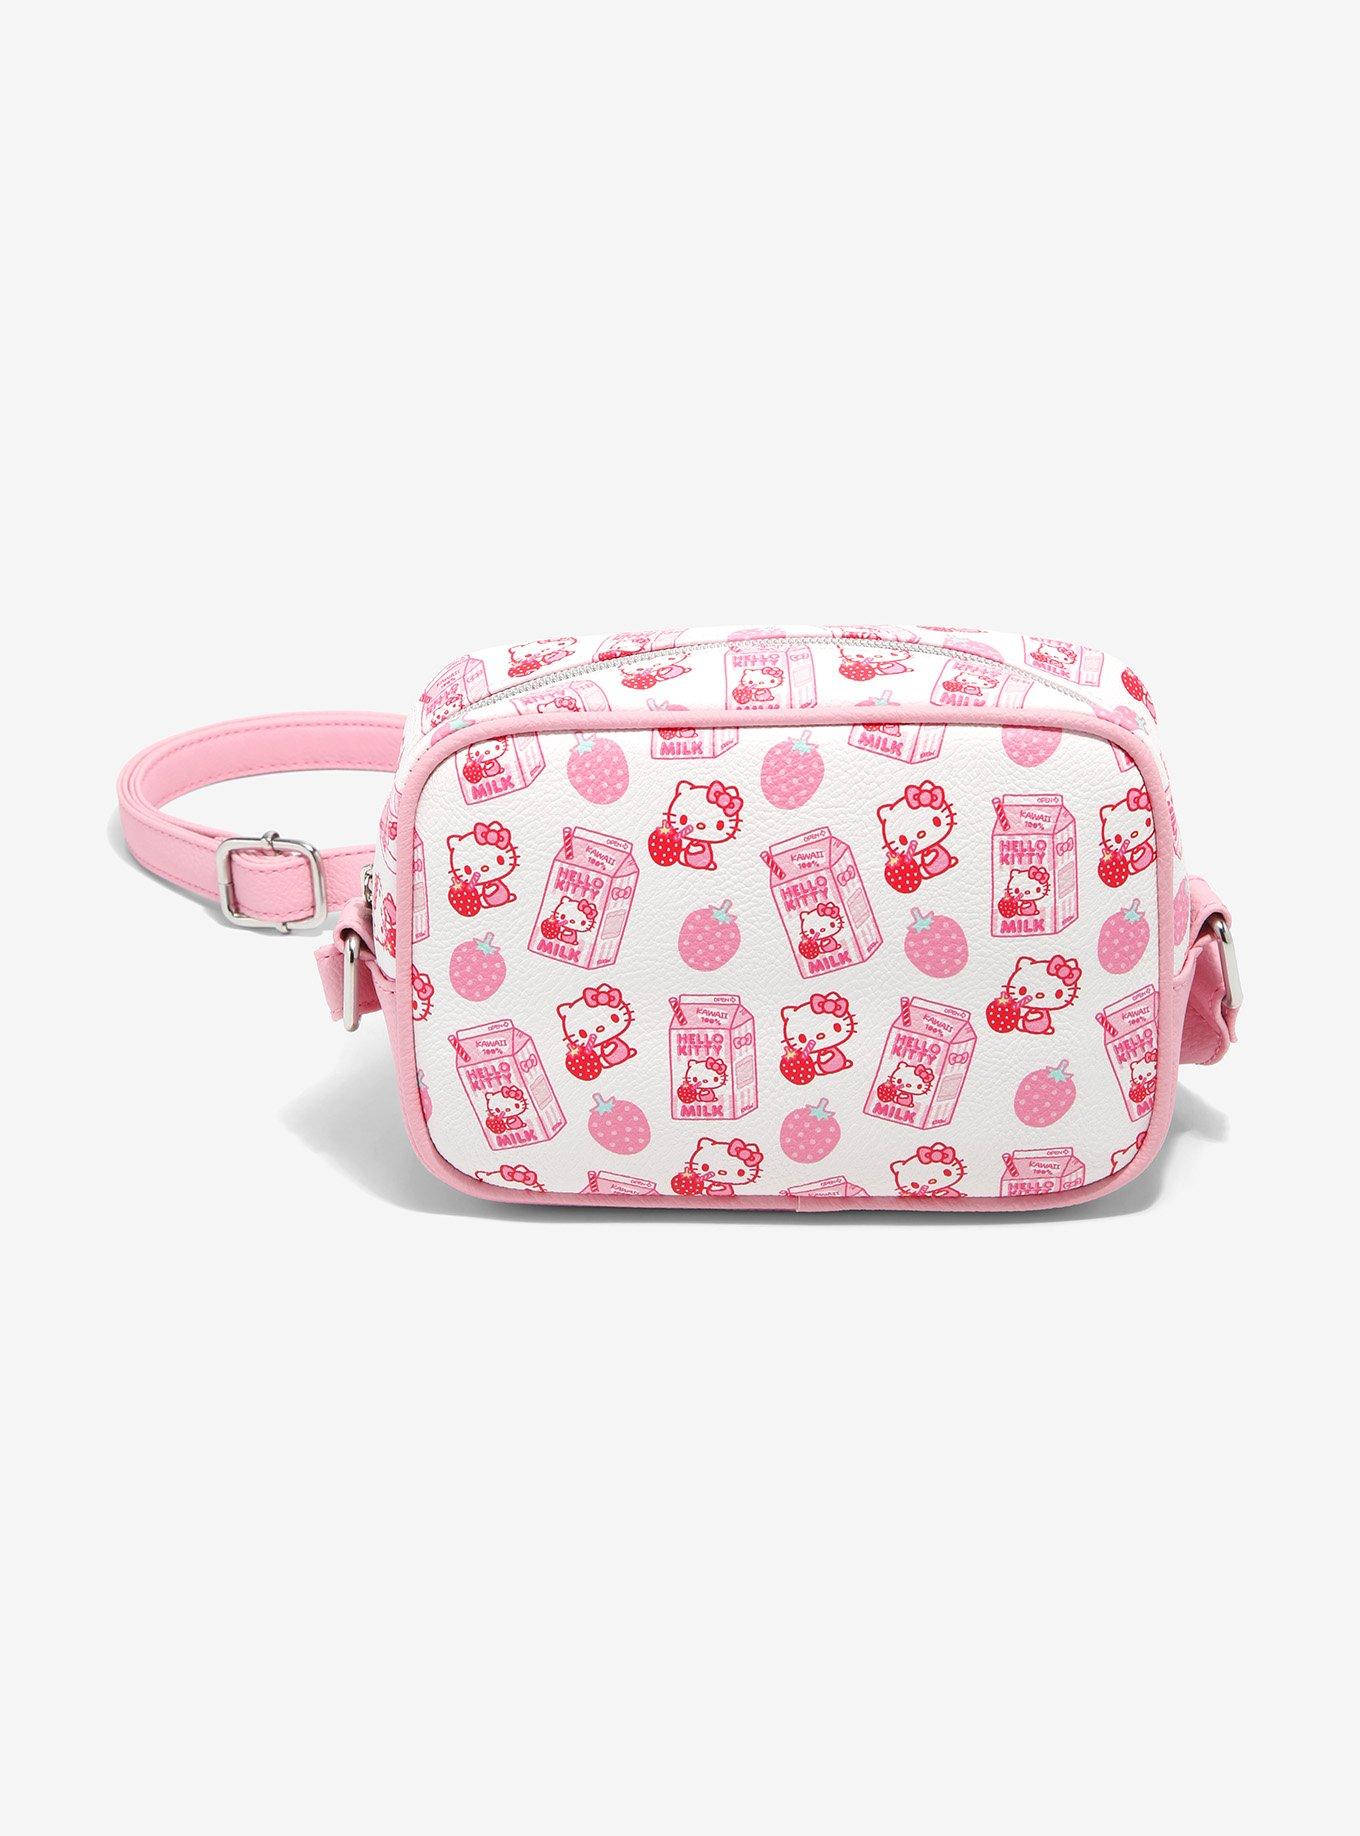 New Hello Kitty Loungefly Backpack and Wallet Now Available at